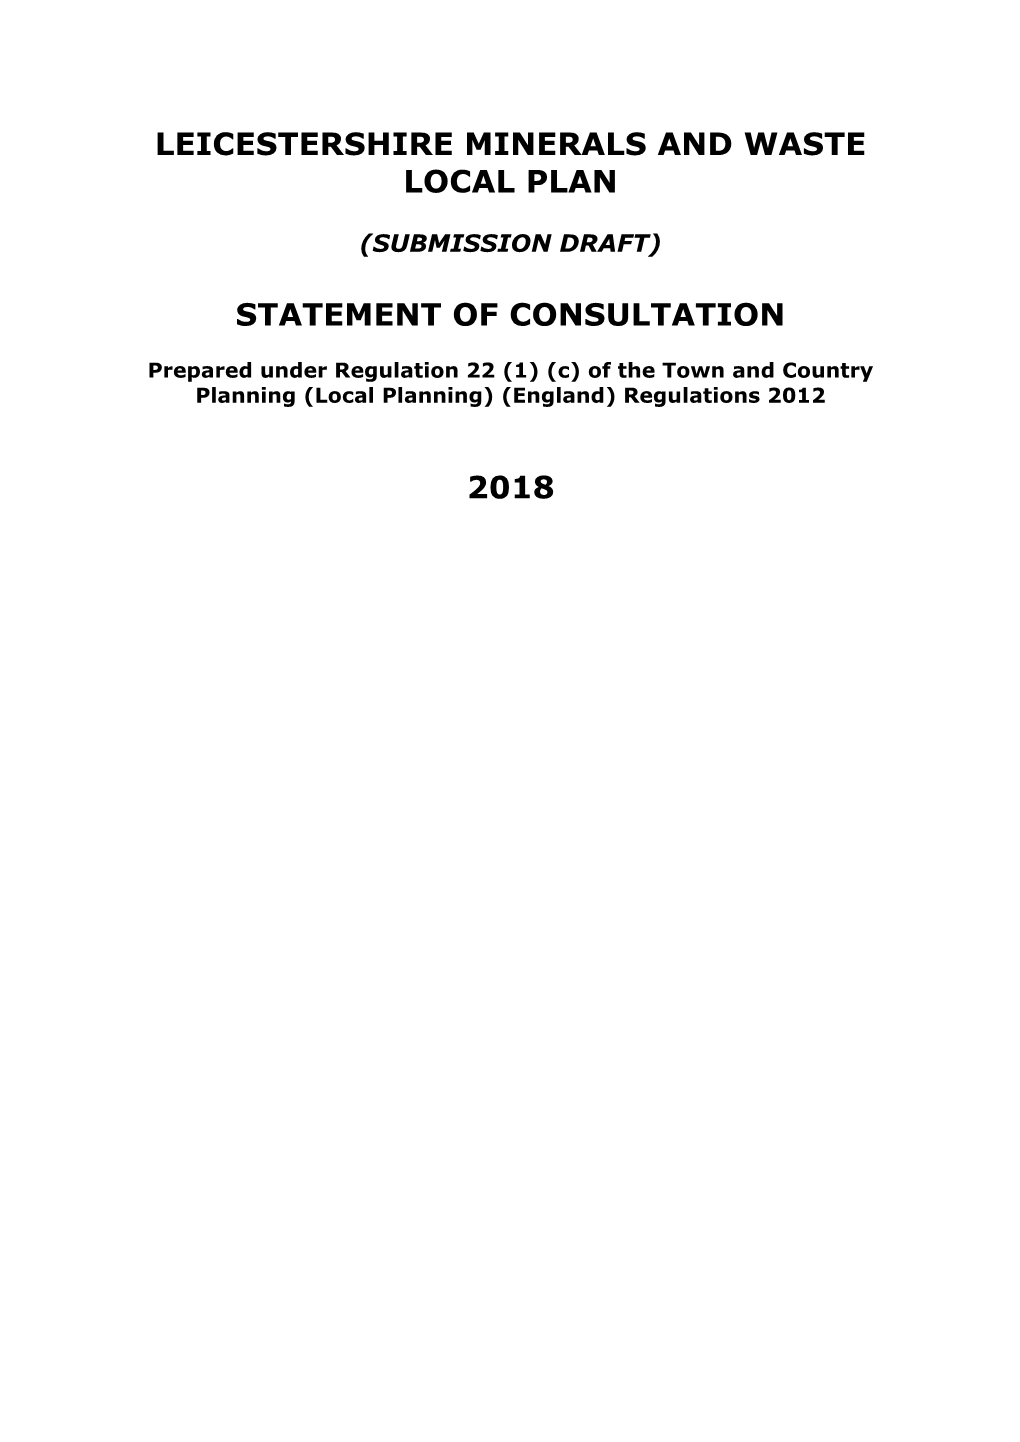 Leicestershire Minerals and Waste Local Plan Statement of Consultation 2018